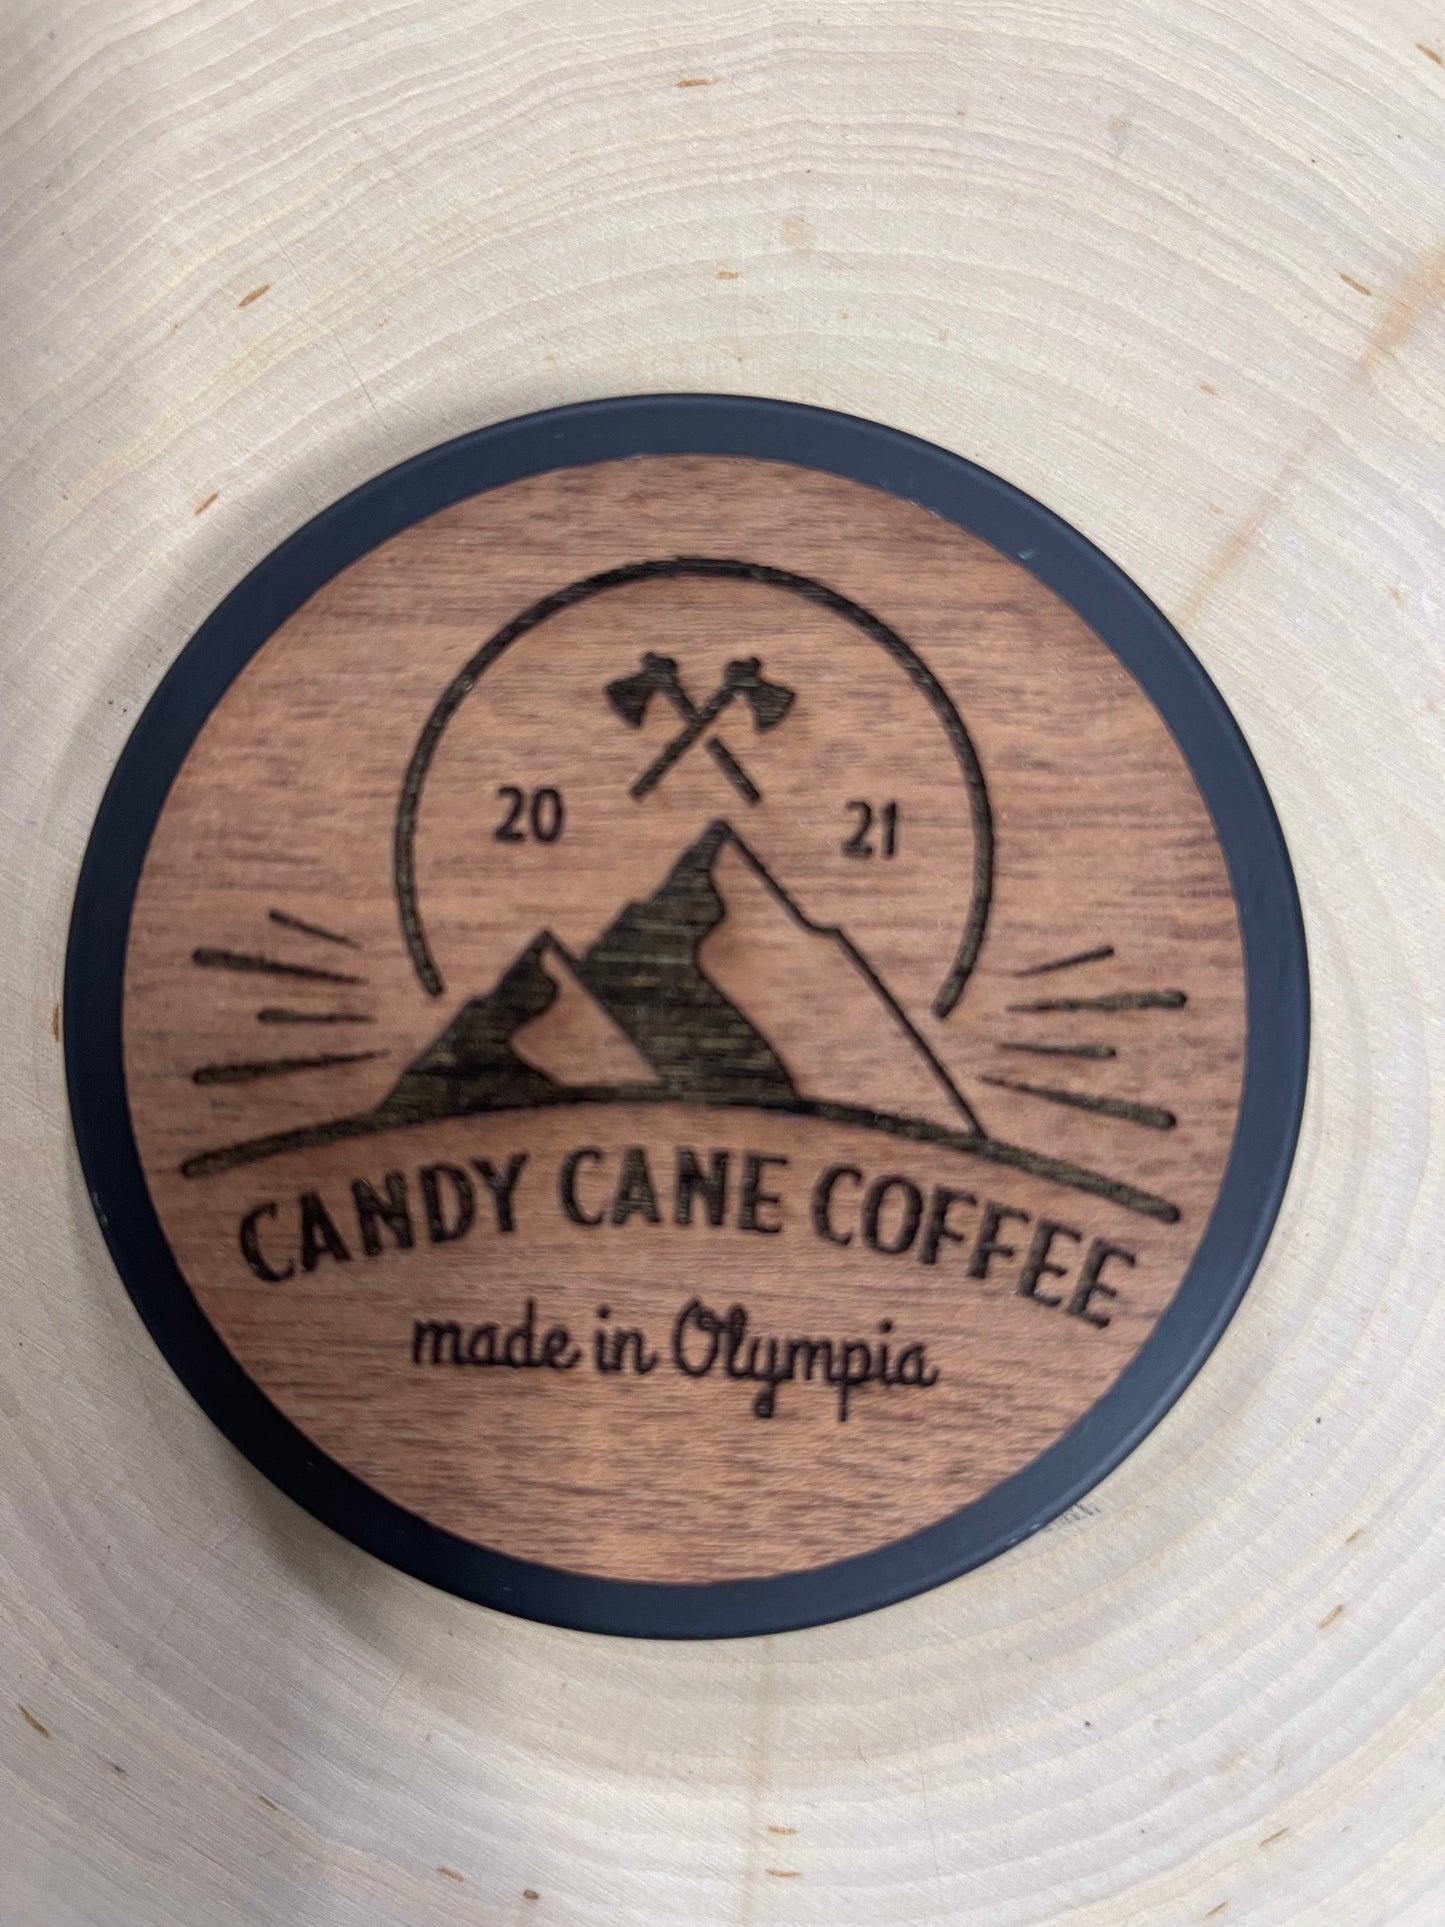 Candy cane coffee 6oz Candle